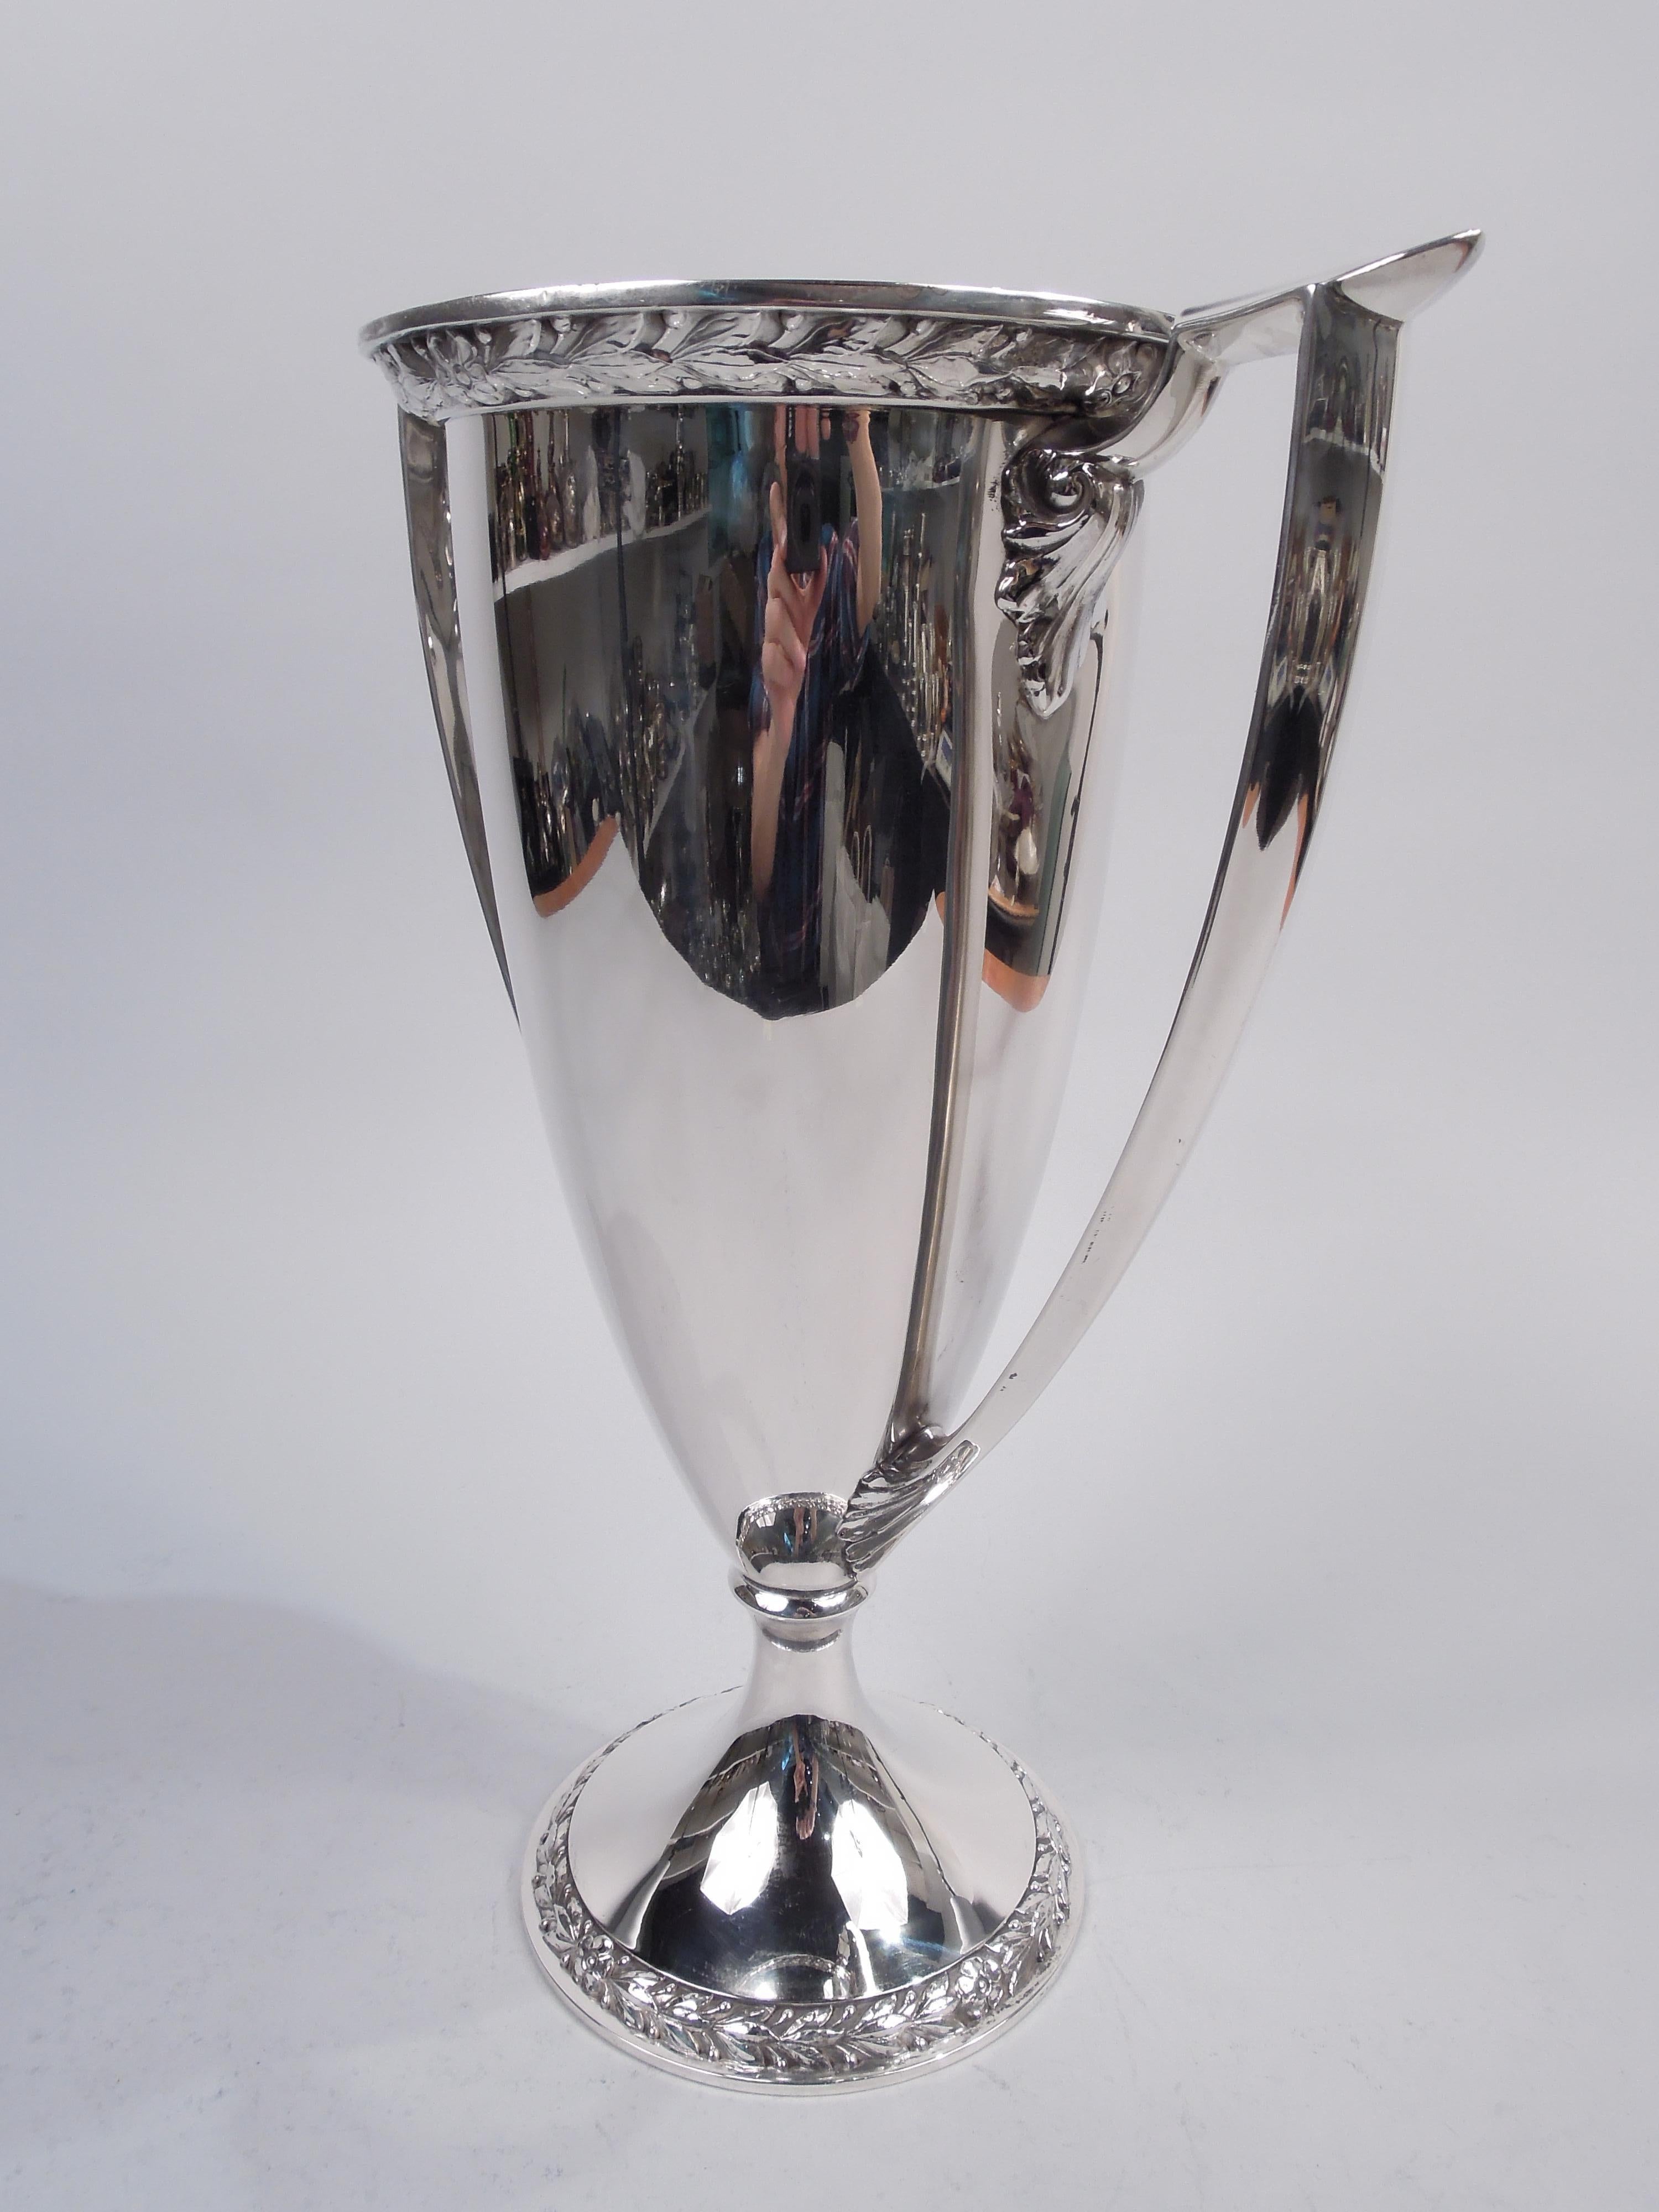 Appliqué Gorham Tall Edwardian Classical Sterling Silver Trophy Cup